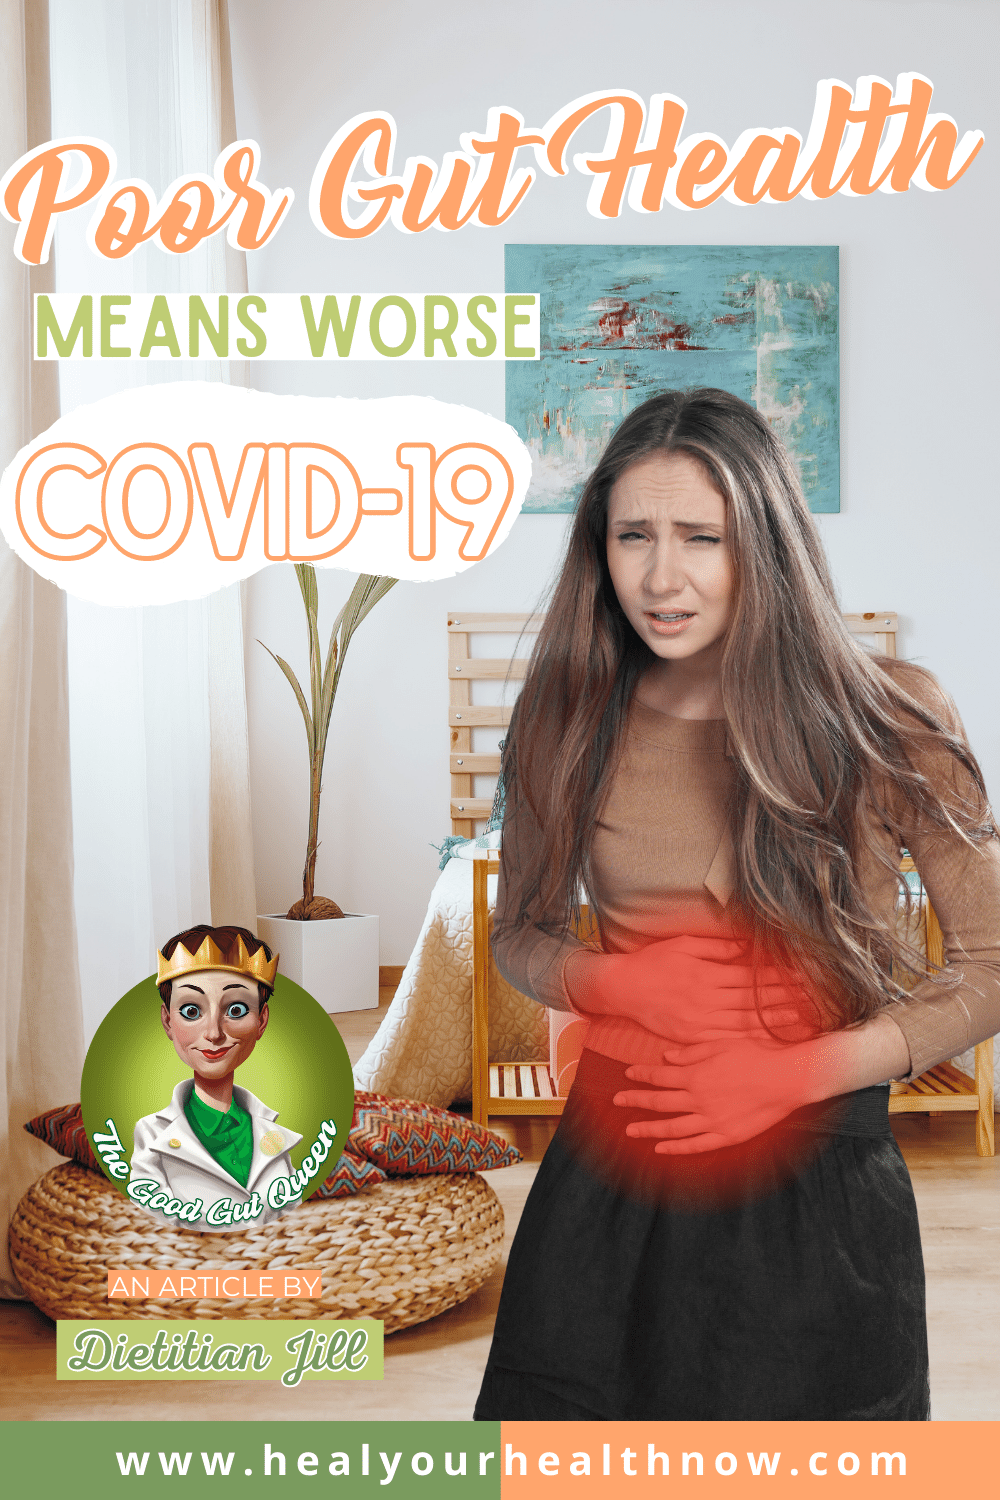 Poor Gut Health Means Worse COVID-19